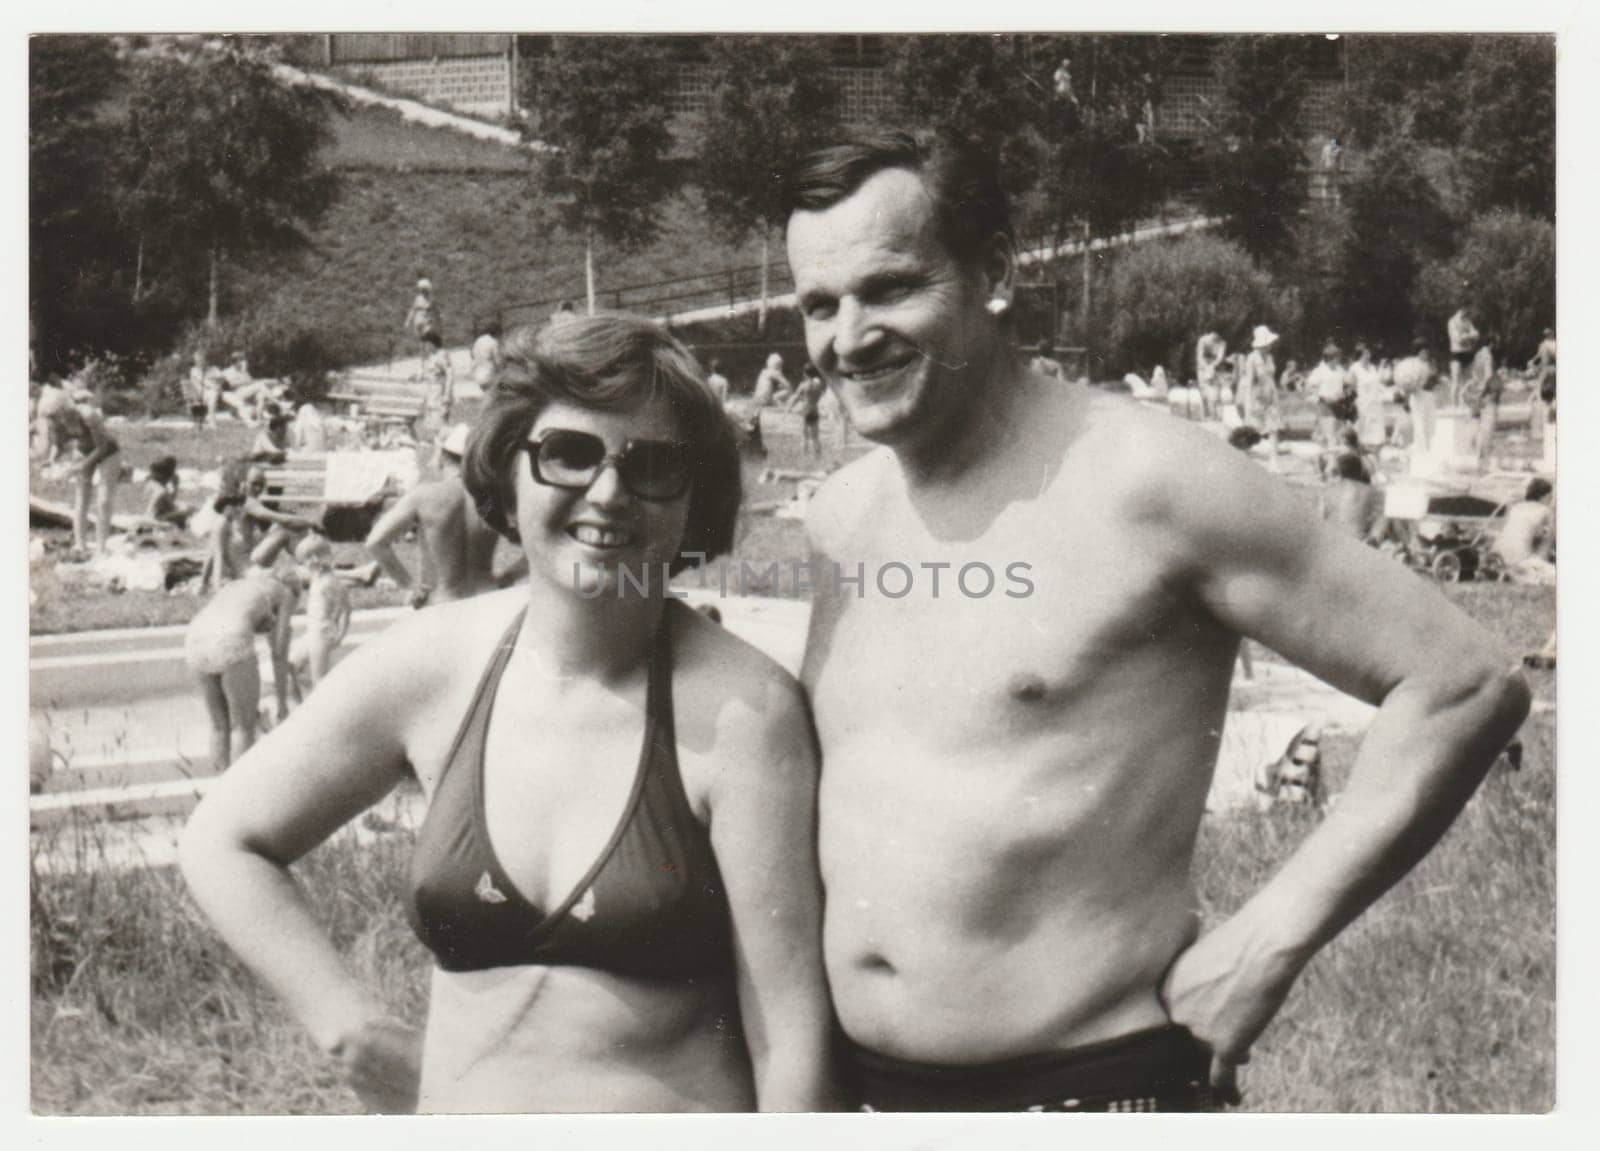 THE CZECHOSLOVAK SOCIALIST REPUBLIC - CIRCA 1980s: Vintage photo shows a mature couple next to outdoor swimming pool. Holidays - vacation theme. Retro black and white photography. Circa 1980.